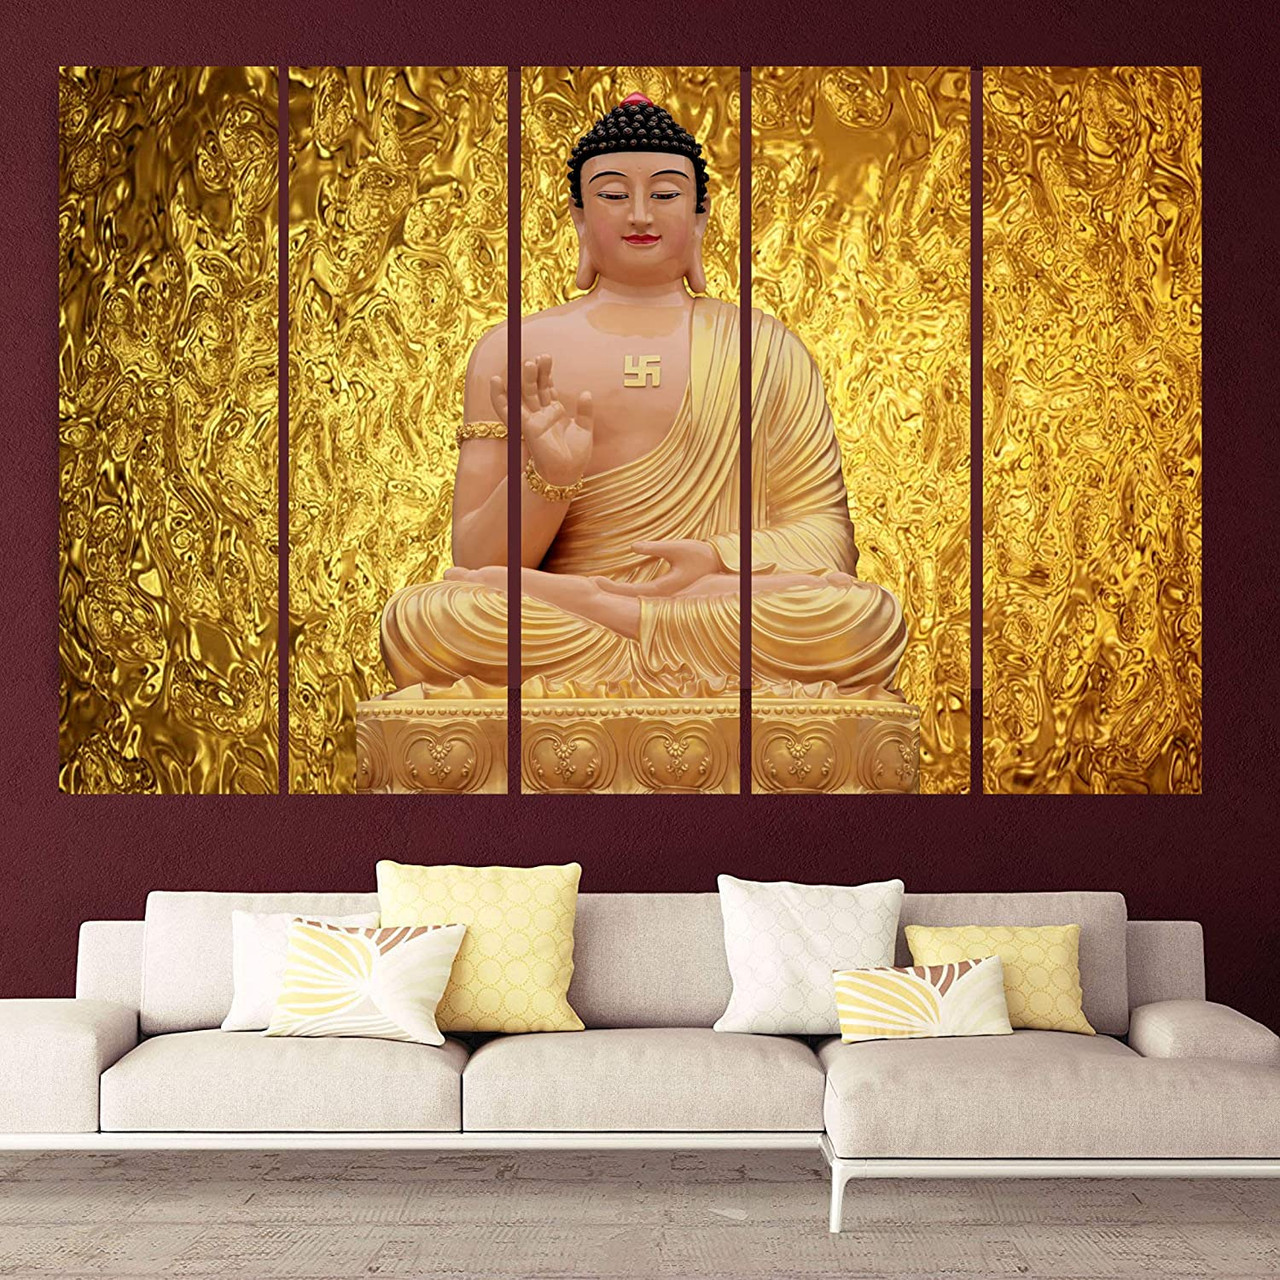 Canvas Painting - Beautiful Buddha Art Wall Painting For Living Room,  Bedroom, Office, Hotels, Drawing Room (91cm X 61cm) - Inephos